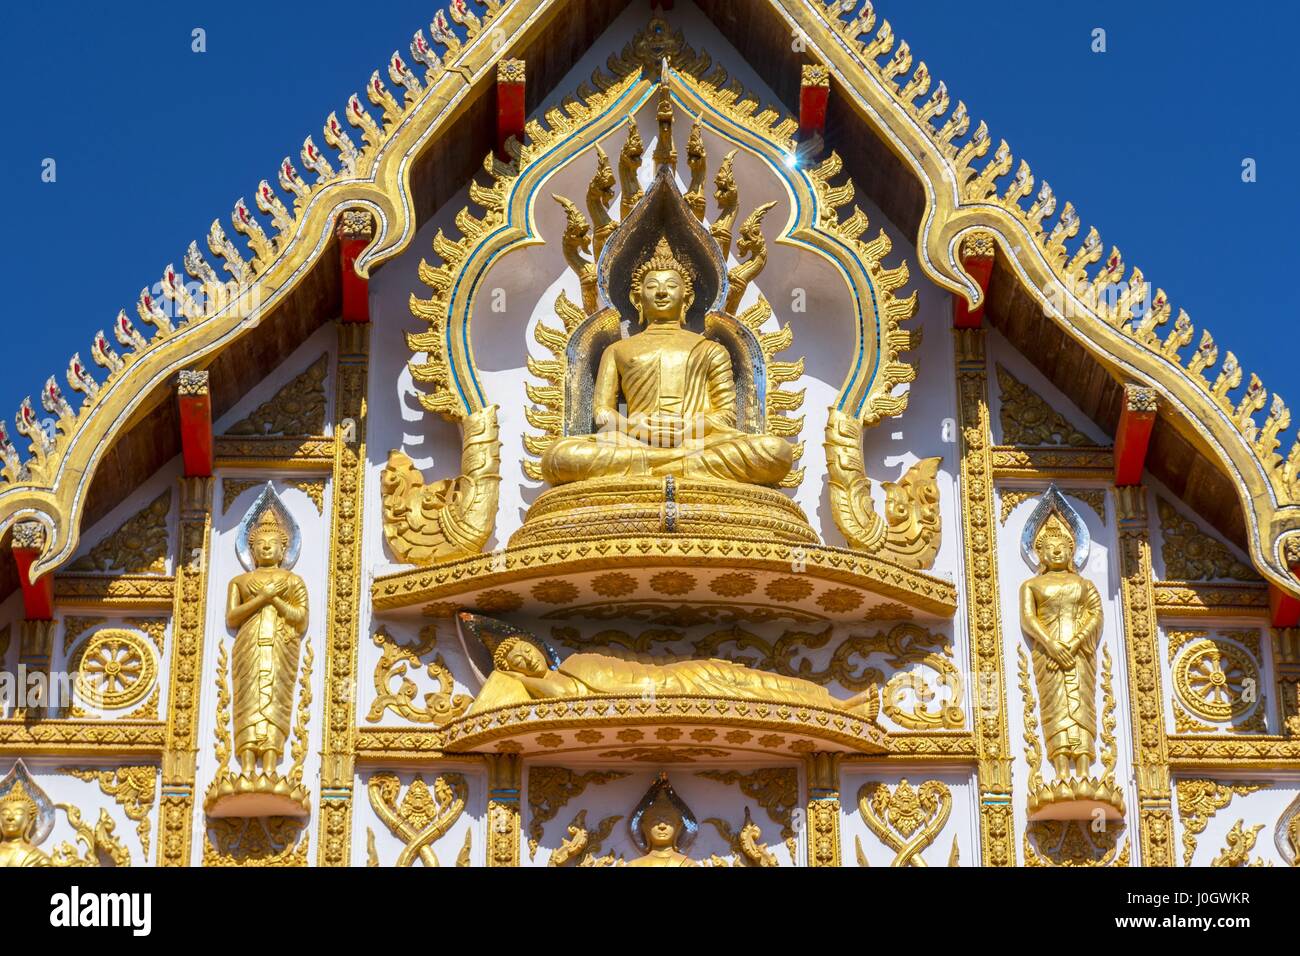 Wat That Phoun temple in the capital city of Laos, Vientiane. Stock Photo